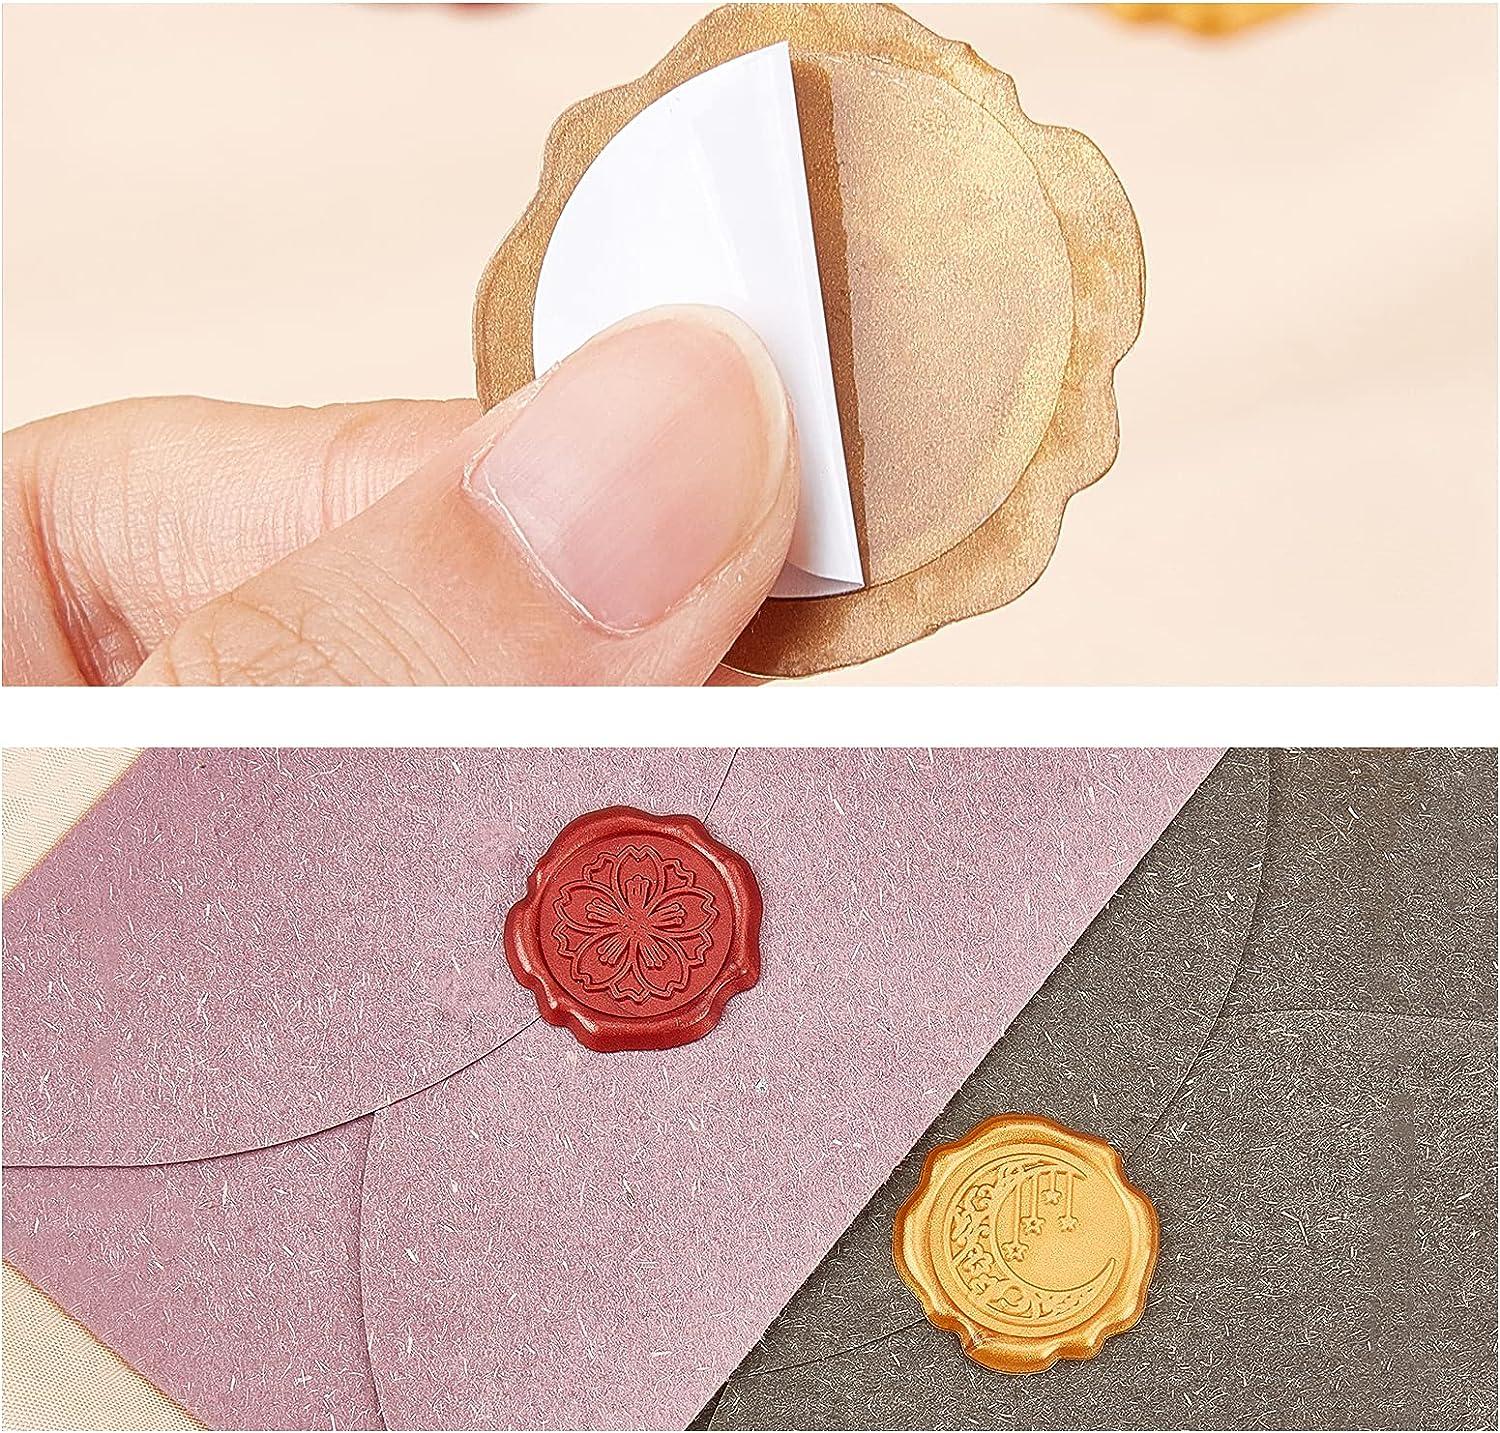 50Pcs Gold Letter H Adhesive Wax Seal Stickers, Hand-Made, No Need Seal  Stamp, Tear and Use Wax Stickers for Wedding Invitations, Envelopes,  Christmas